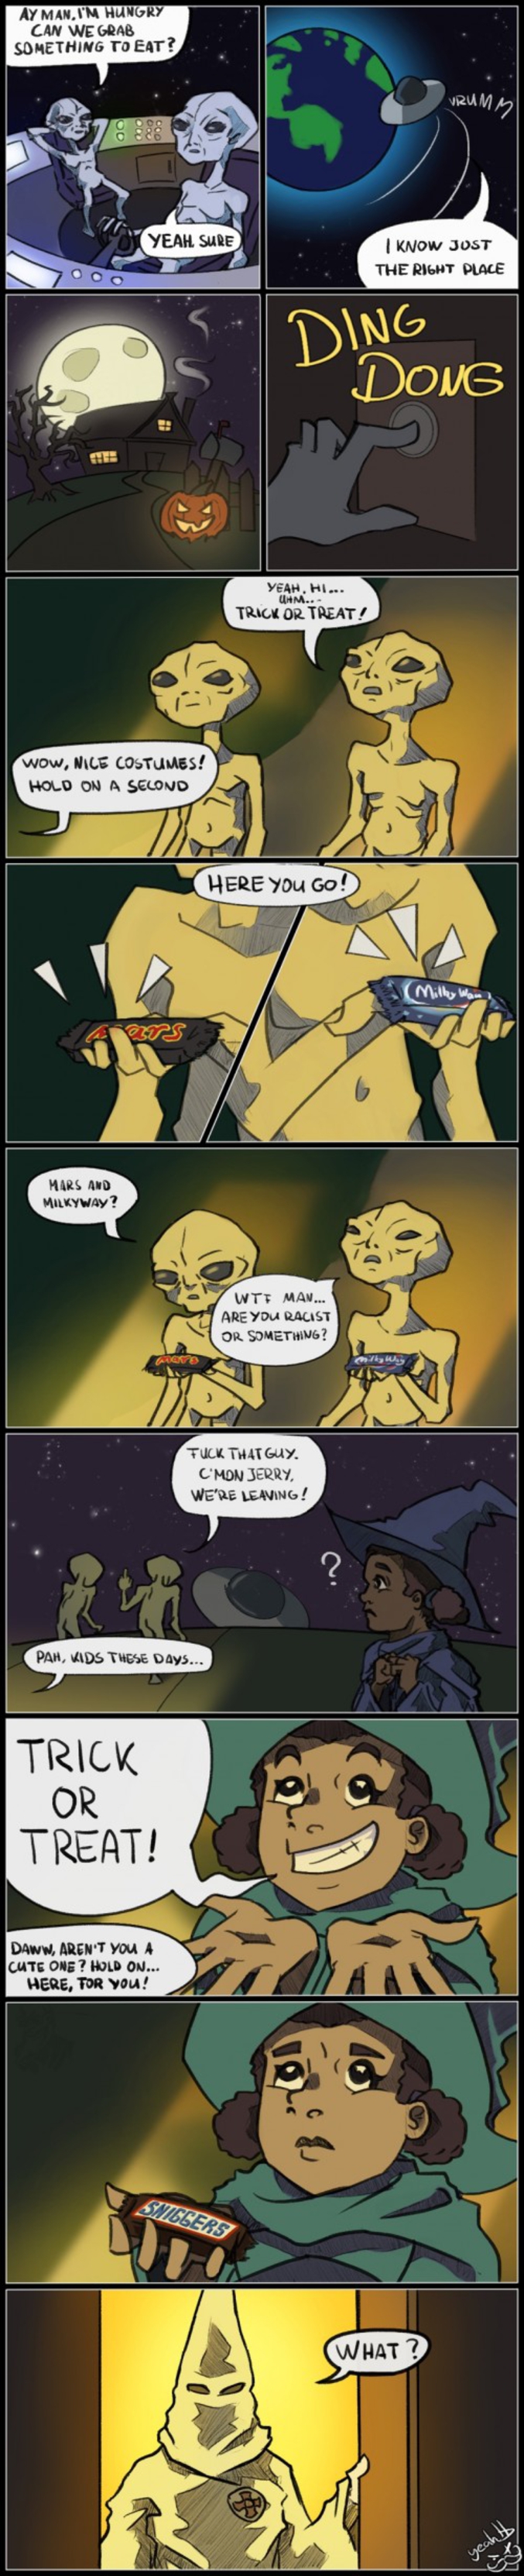 Hungry aliens